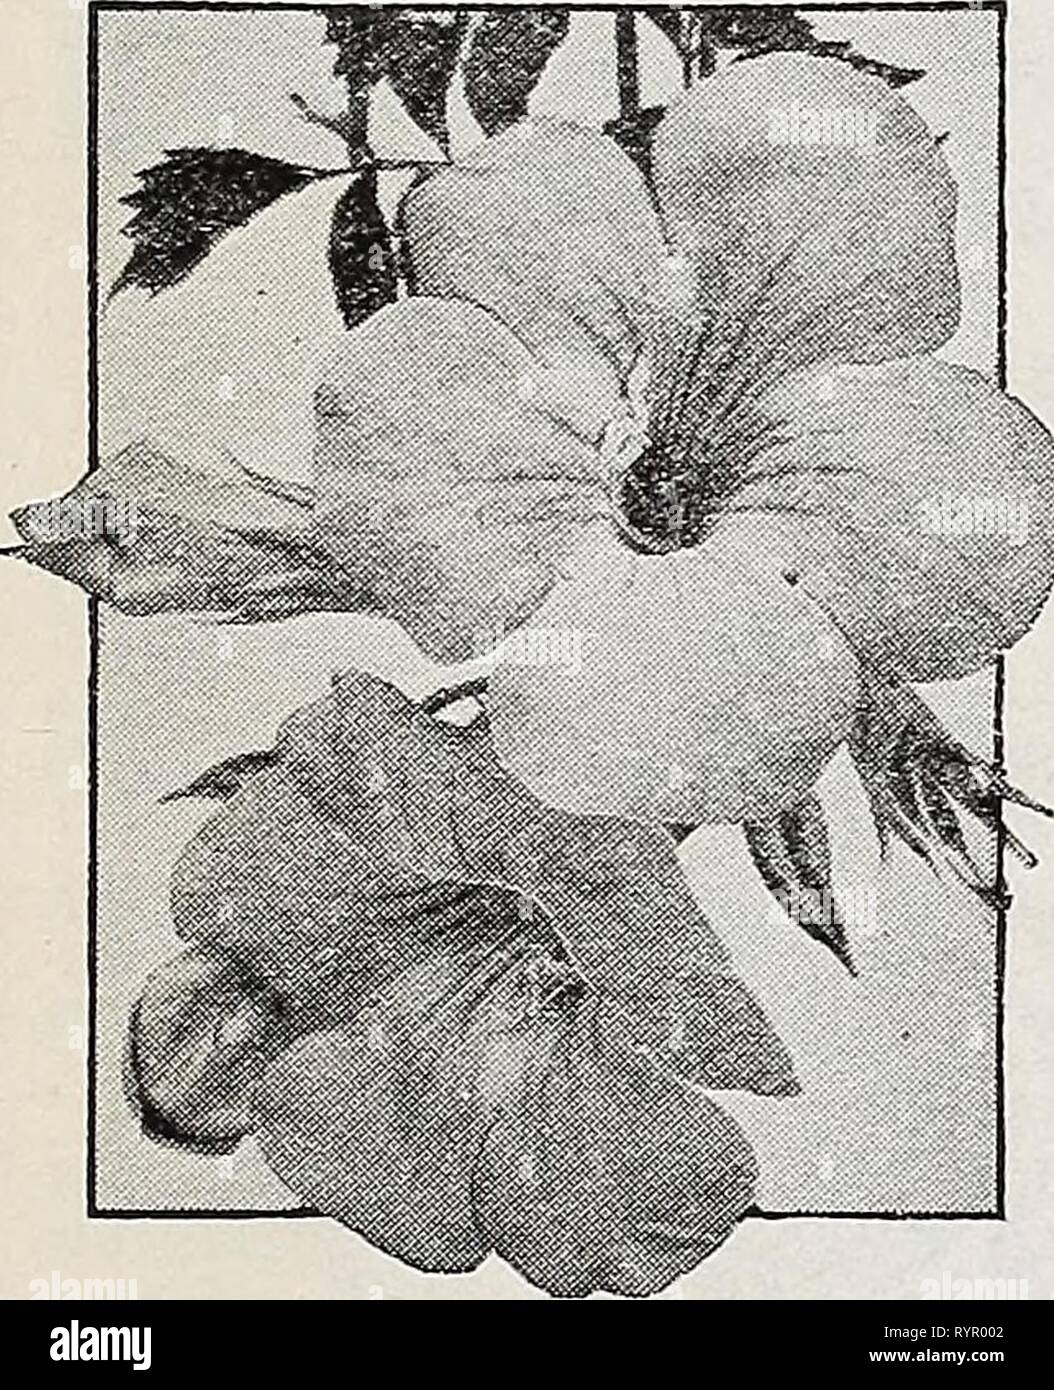 Dreer's wholesale catalog for florists Dreer's wholesale catalog for florists and market gardeners : autumn 1941 edition . dreerswholesalec1941henr Year: 1941  ENRY A. DREER, Inc. Dreer's Select WHOLESALE CATALOG Hardy Vines and Climbers The 'Hundred Rate' applies to 10 op luore of a variety. Actinidia—Silver Vine Arguta. Strong two-year-old plants, 53c each; $50.00 per 100. Ampelopsis Xiowi. The miniature-leaved form of Ampelopsis Veitchi. 3-inch pots 33c each; $30.00 per 100. QuincLuefolia (Virginia Creeper, American Ivy), two-year-old plants 21c each; $18.00 per 100. Veitclii (Boston or Jap Stock Photo